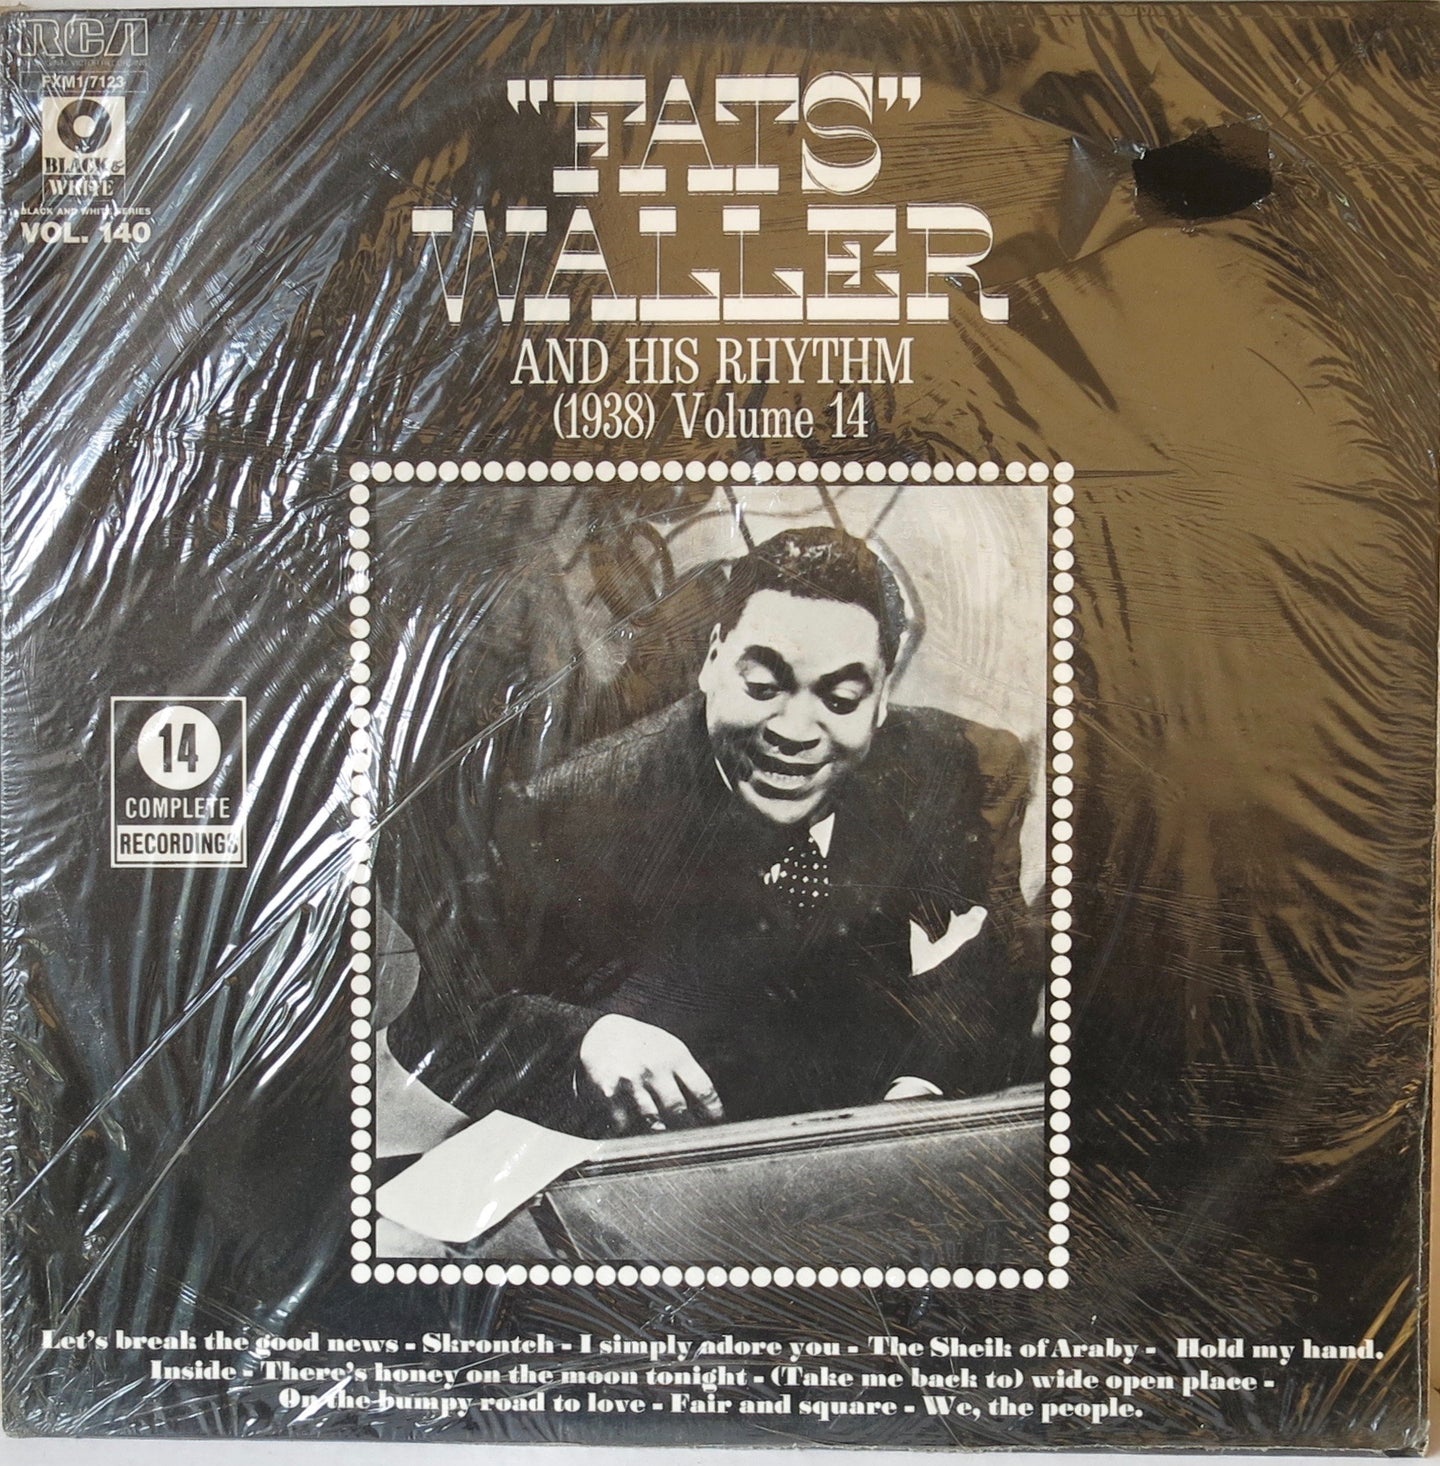 Fats Waller and his Rhythm (1938) Volume 140 - Black & White